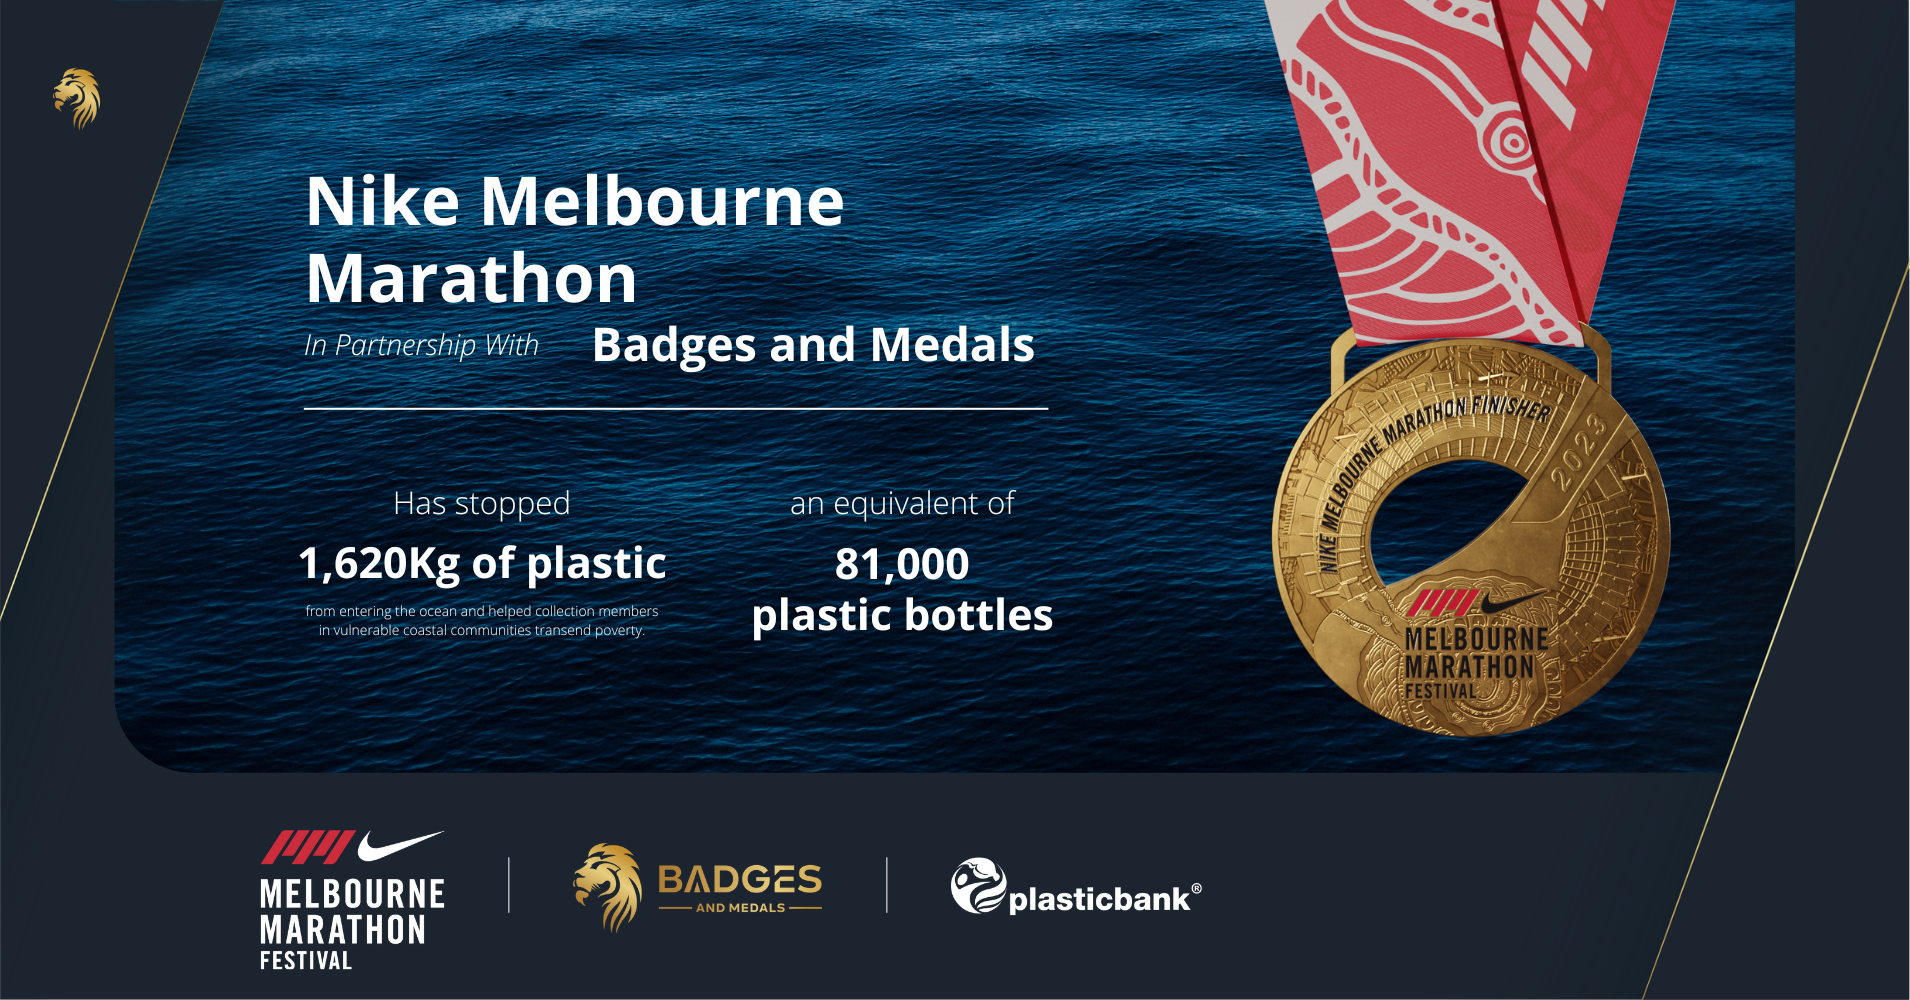 A sustainability pamphlet for the Melbourne Marathon, which reveals that their medals saved 1620 kilograms of plastic.